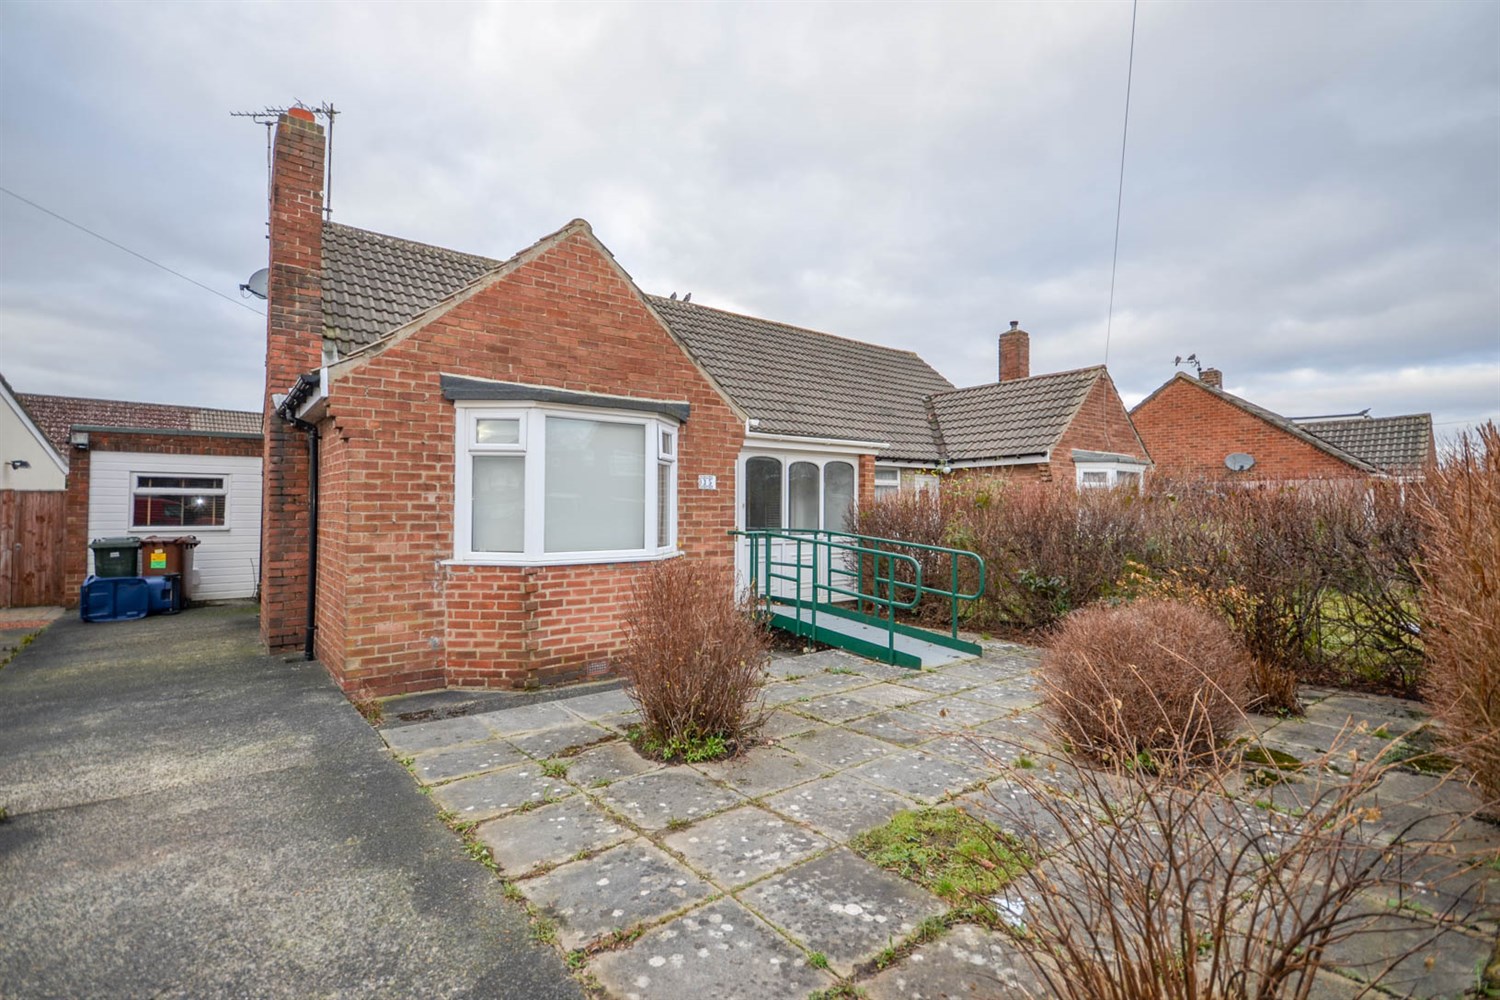 2 bed semi-detached bungalow for sale in Acomb Crescent, Red House Farm - Property Image 1